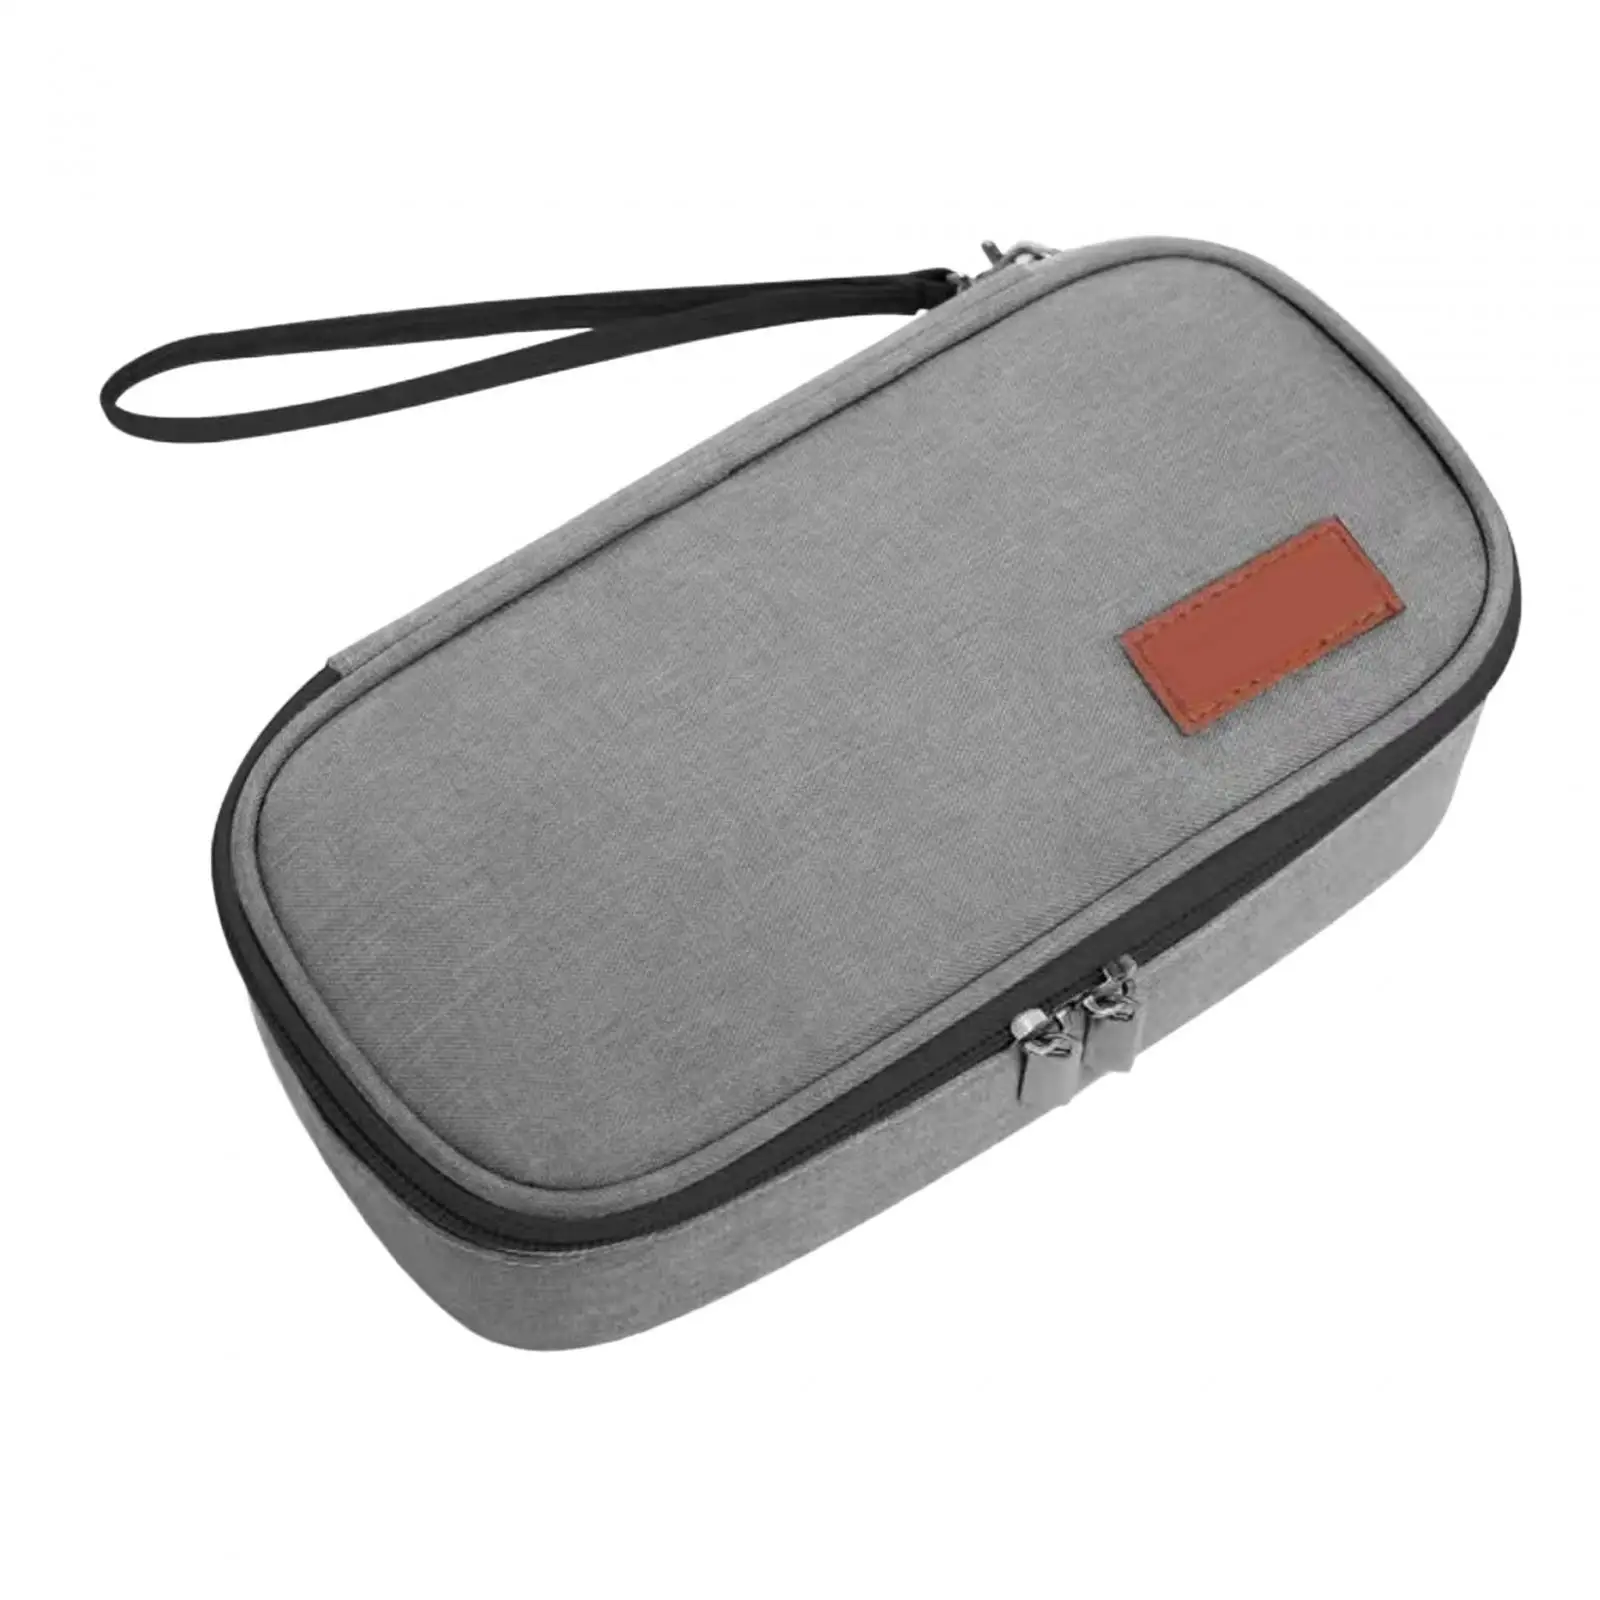 Portable Cooling Bag Oxford Cloth Keep Cool Waterproof Pouch Travel Pill Cooler Case for Home Indoor Office Outdoor